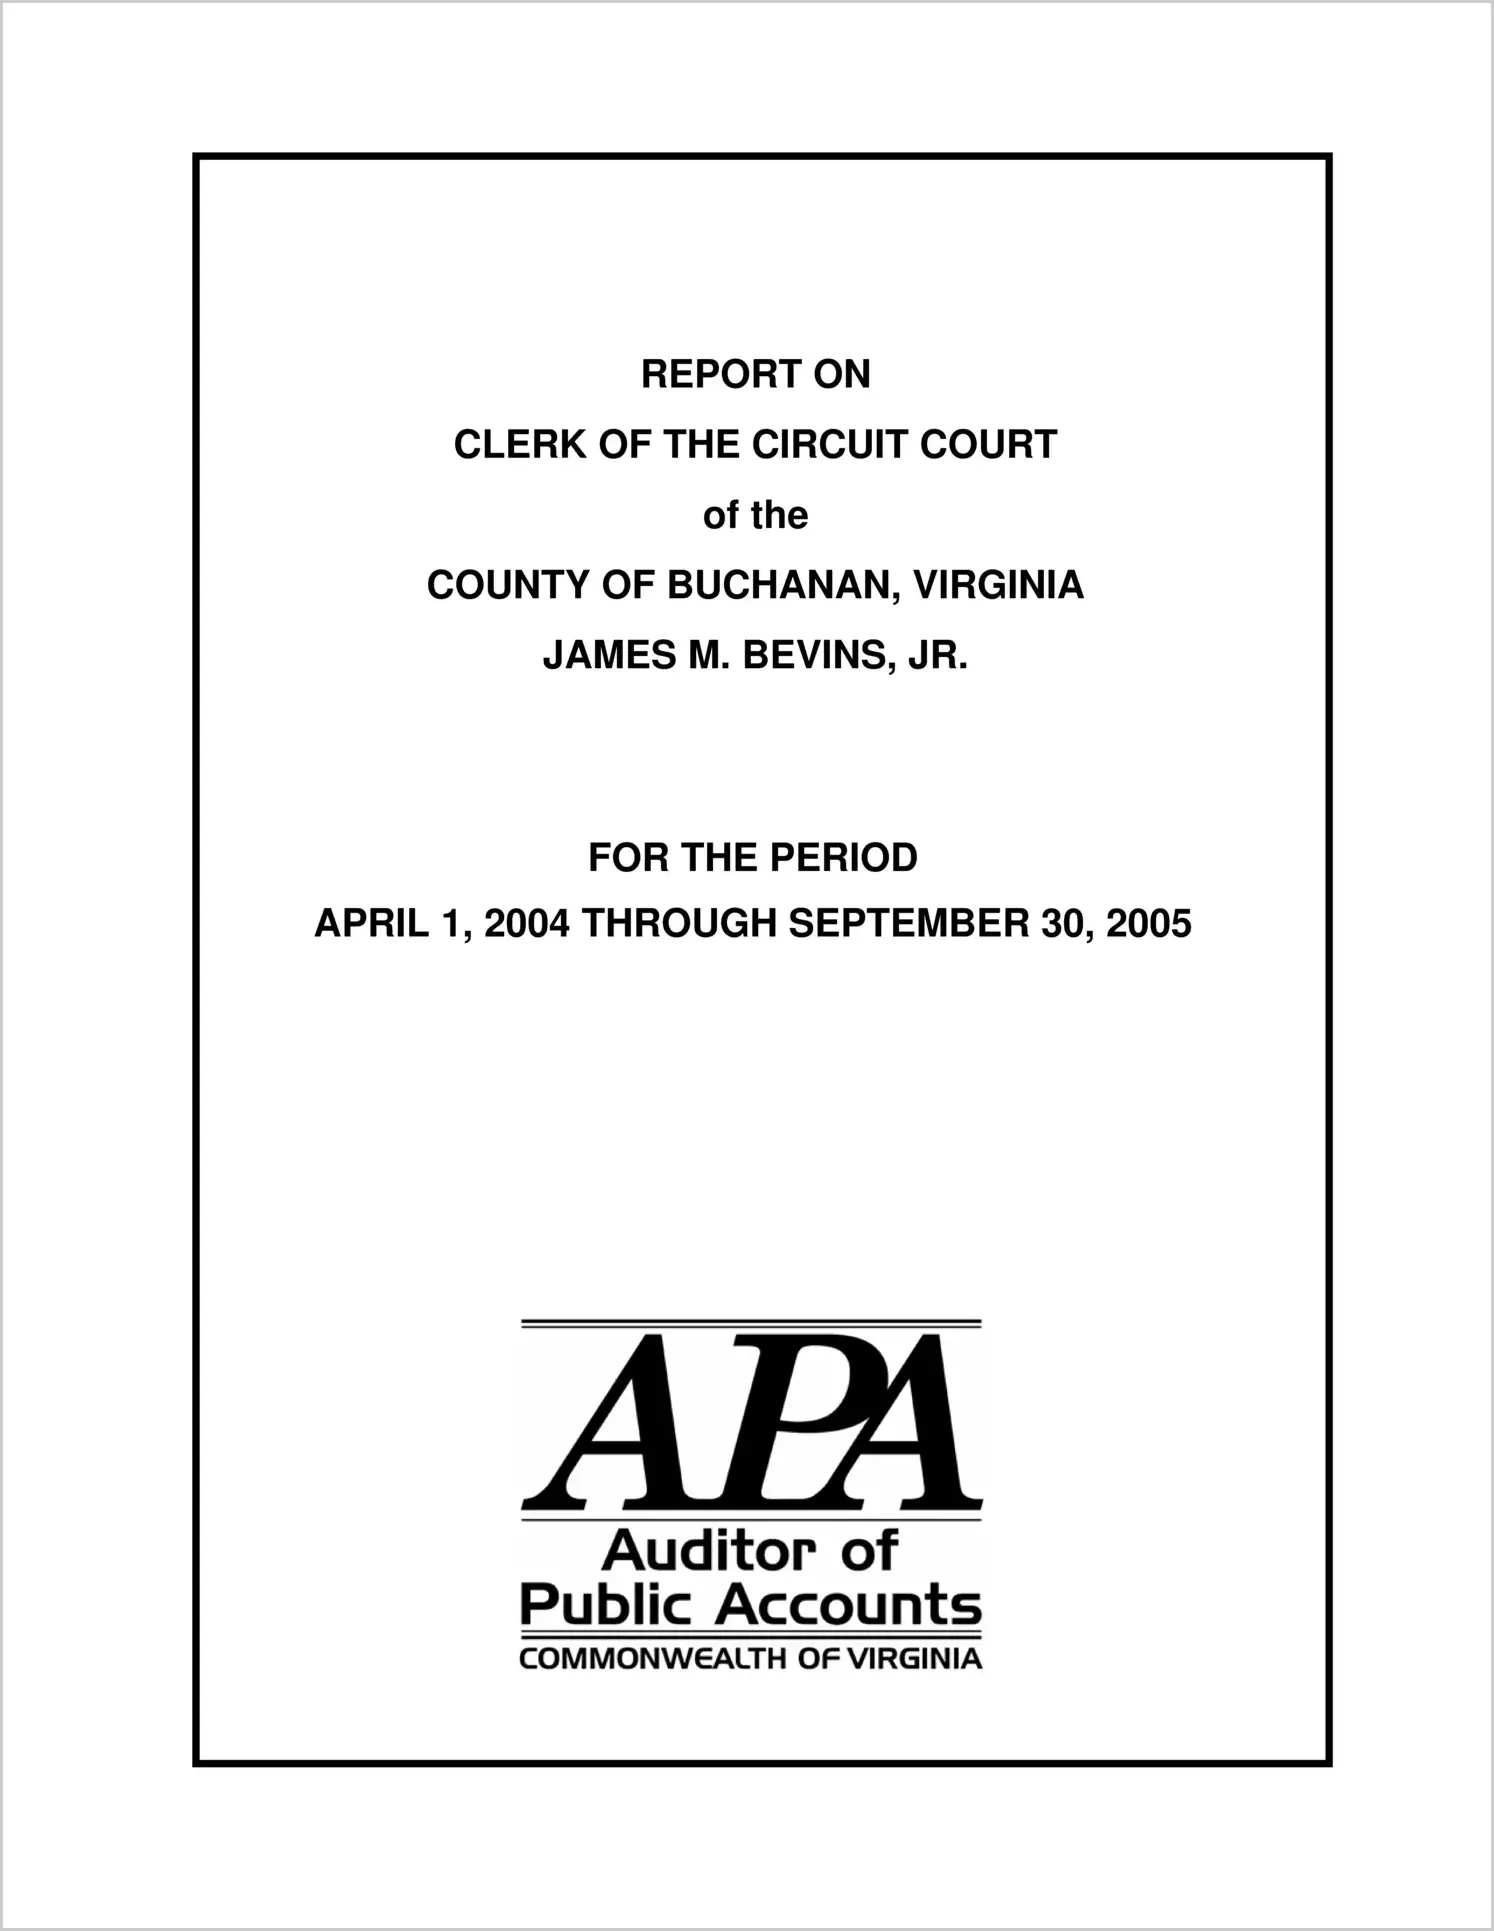 Clerk of the Circuit Court of the County of Buchanan for the period April 1, 2004 through September 30, 2005